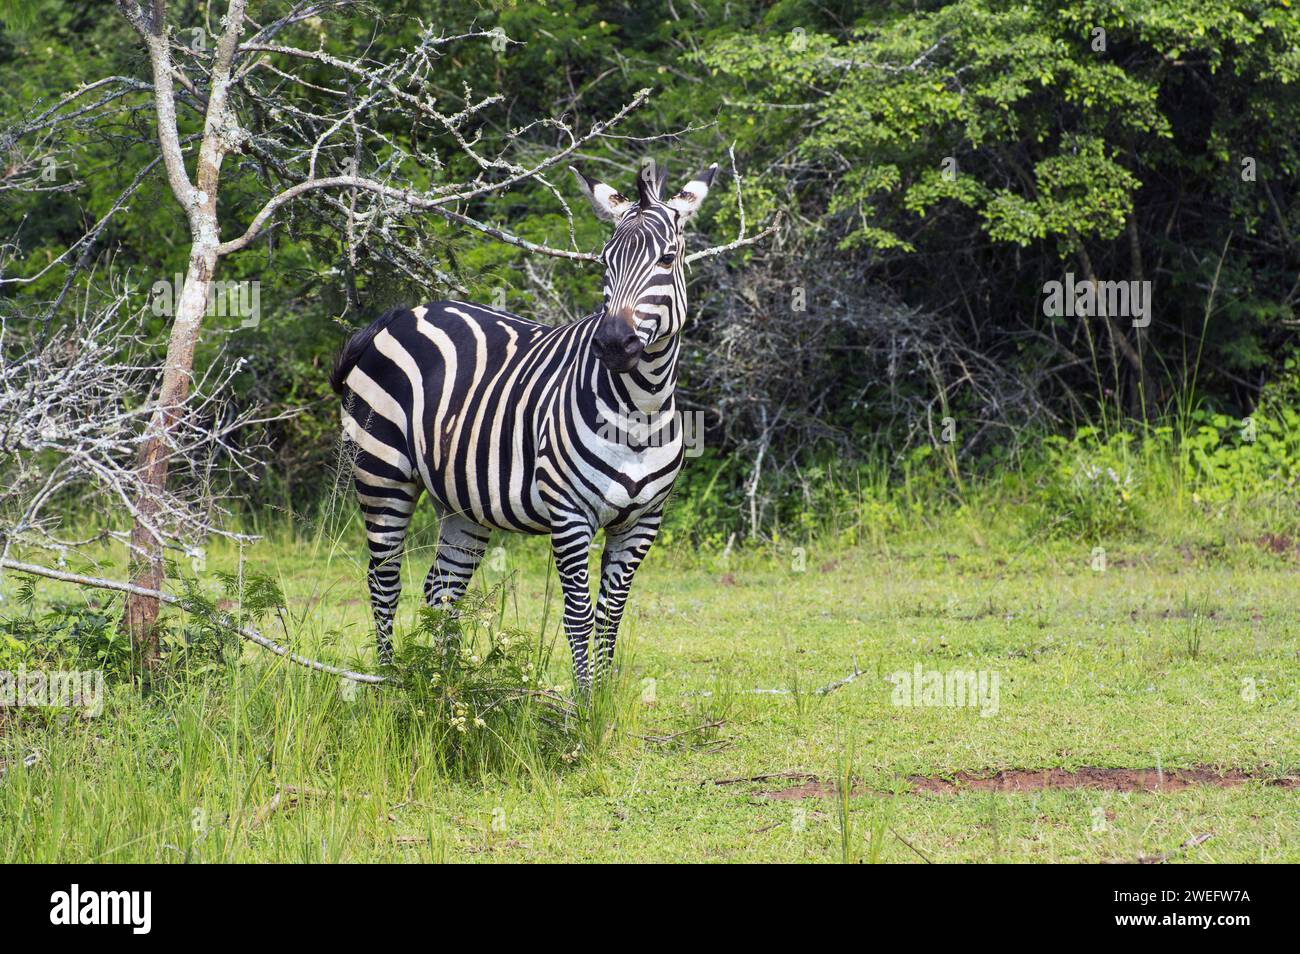 Zebra photograph on safari in Akagera National Park in Northeastern Rwanda, Central Africa’s largest protected wetland. Africa Parks Stock Photo